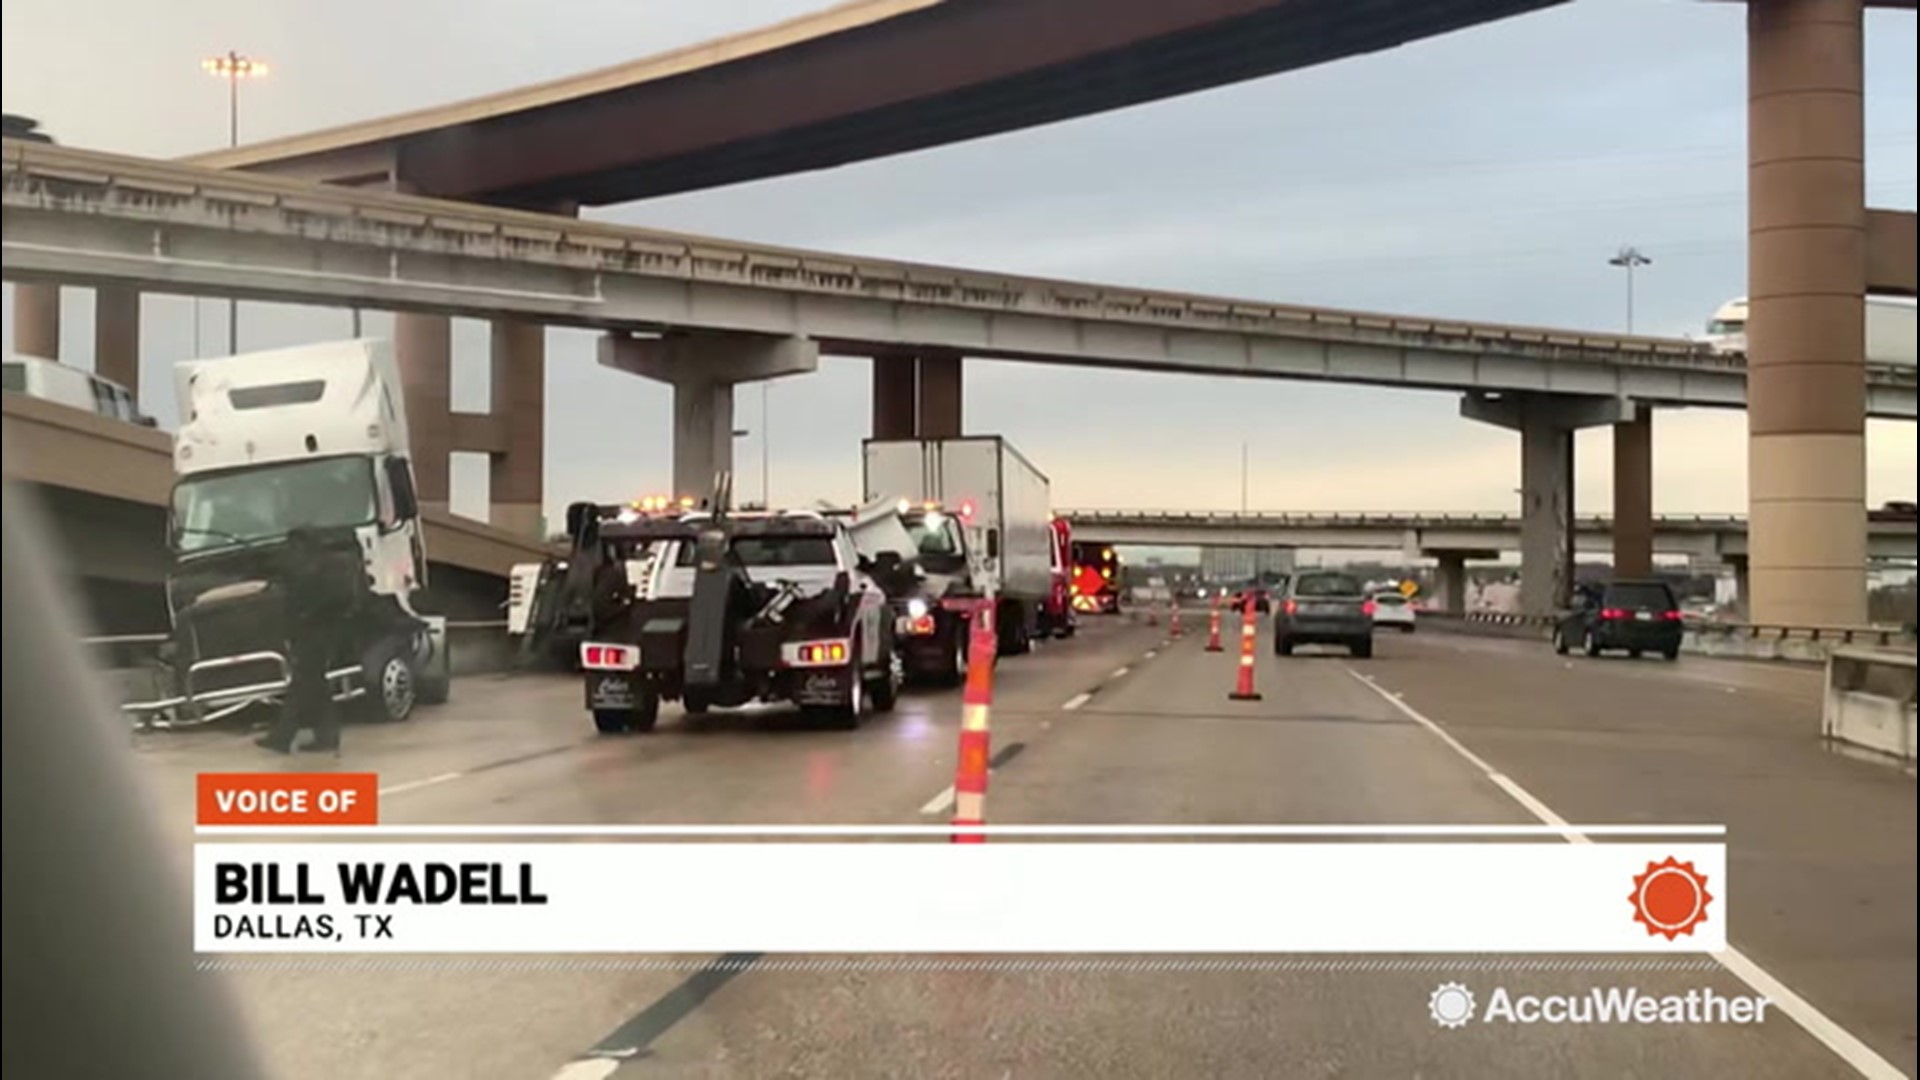 AccuWeather's Bill Wadell is in Dallas, Texas, where slick road conditions caused a truck driver to lose control and dangle off an overpass on Dec. 10.